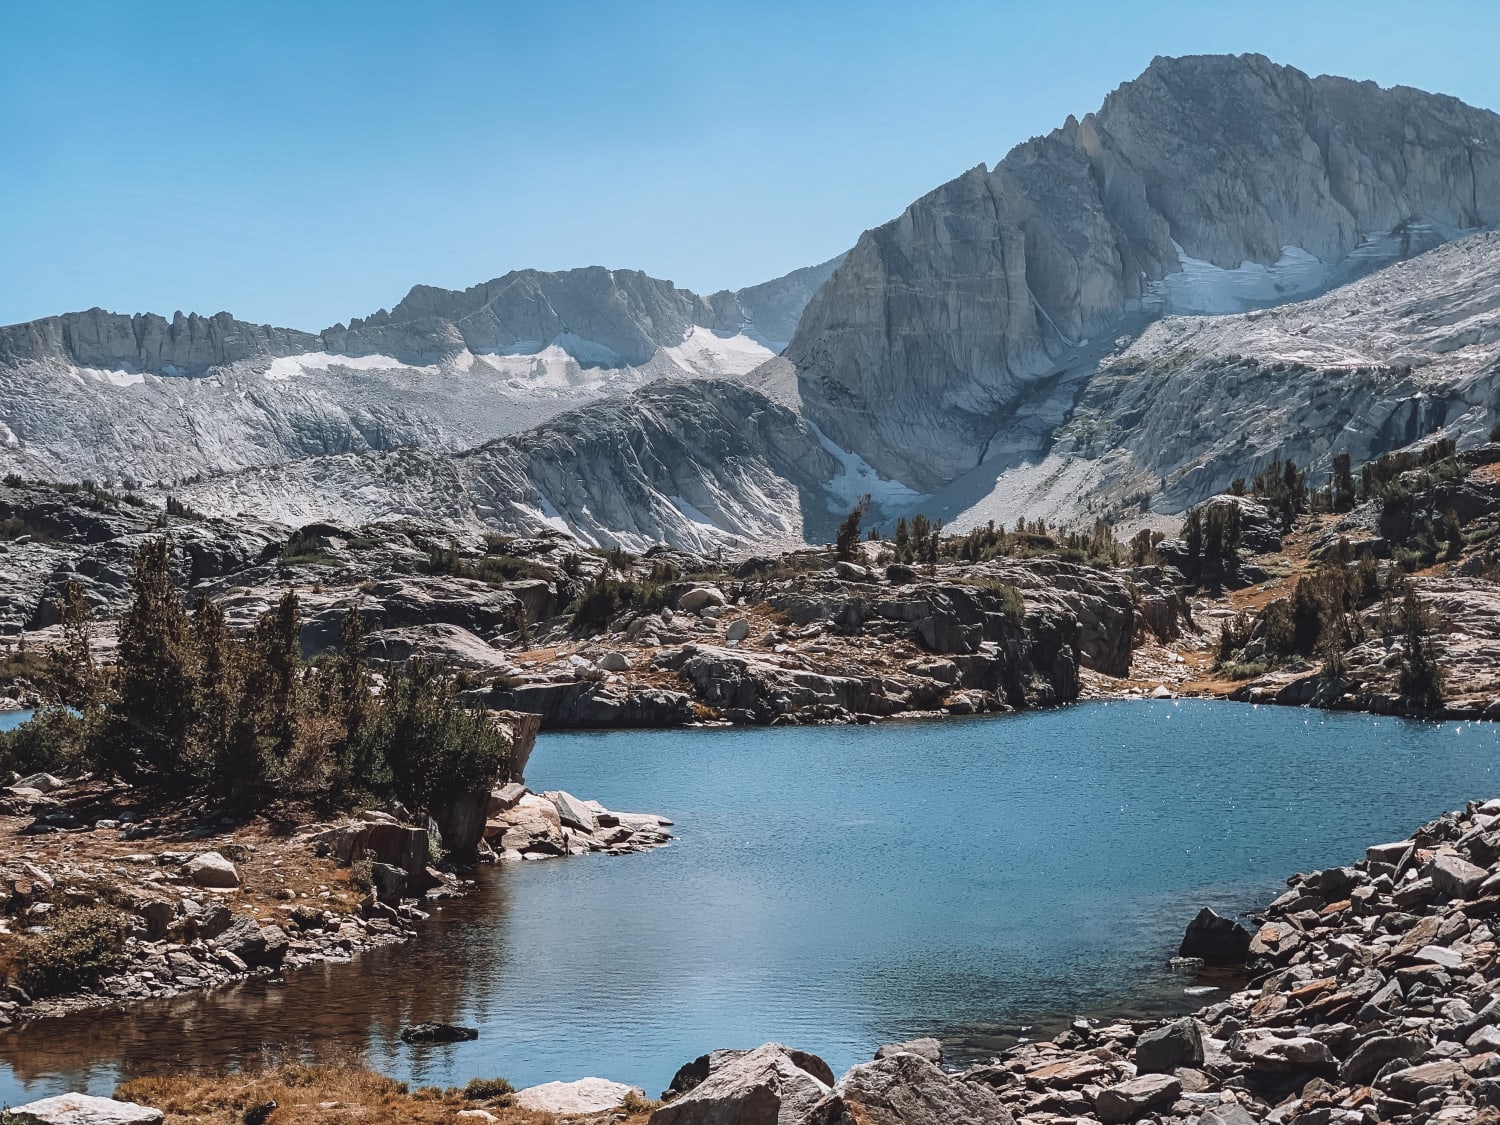 One of my favorite hikes from this summer, a gorgeous alpine lake just outside of Yosemite.